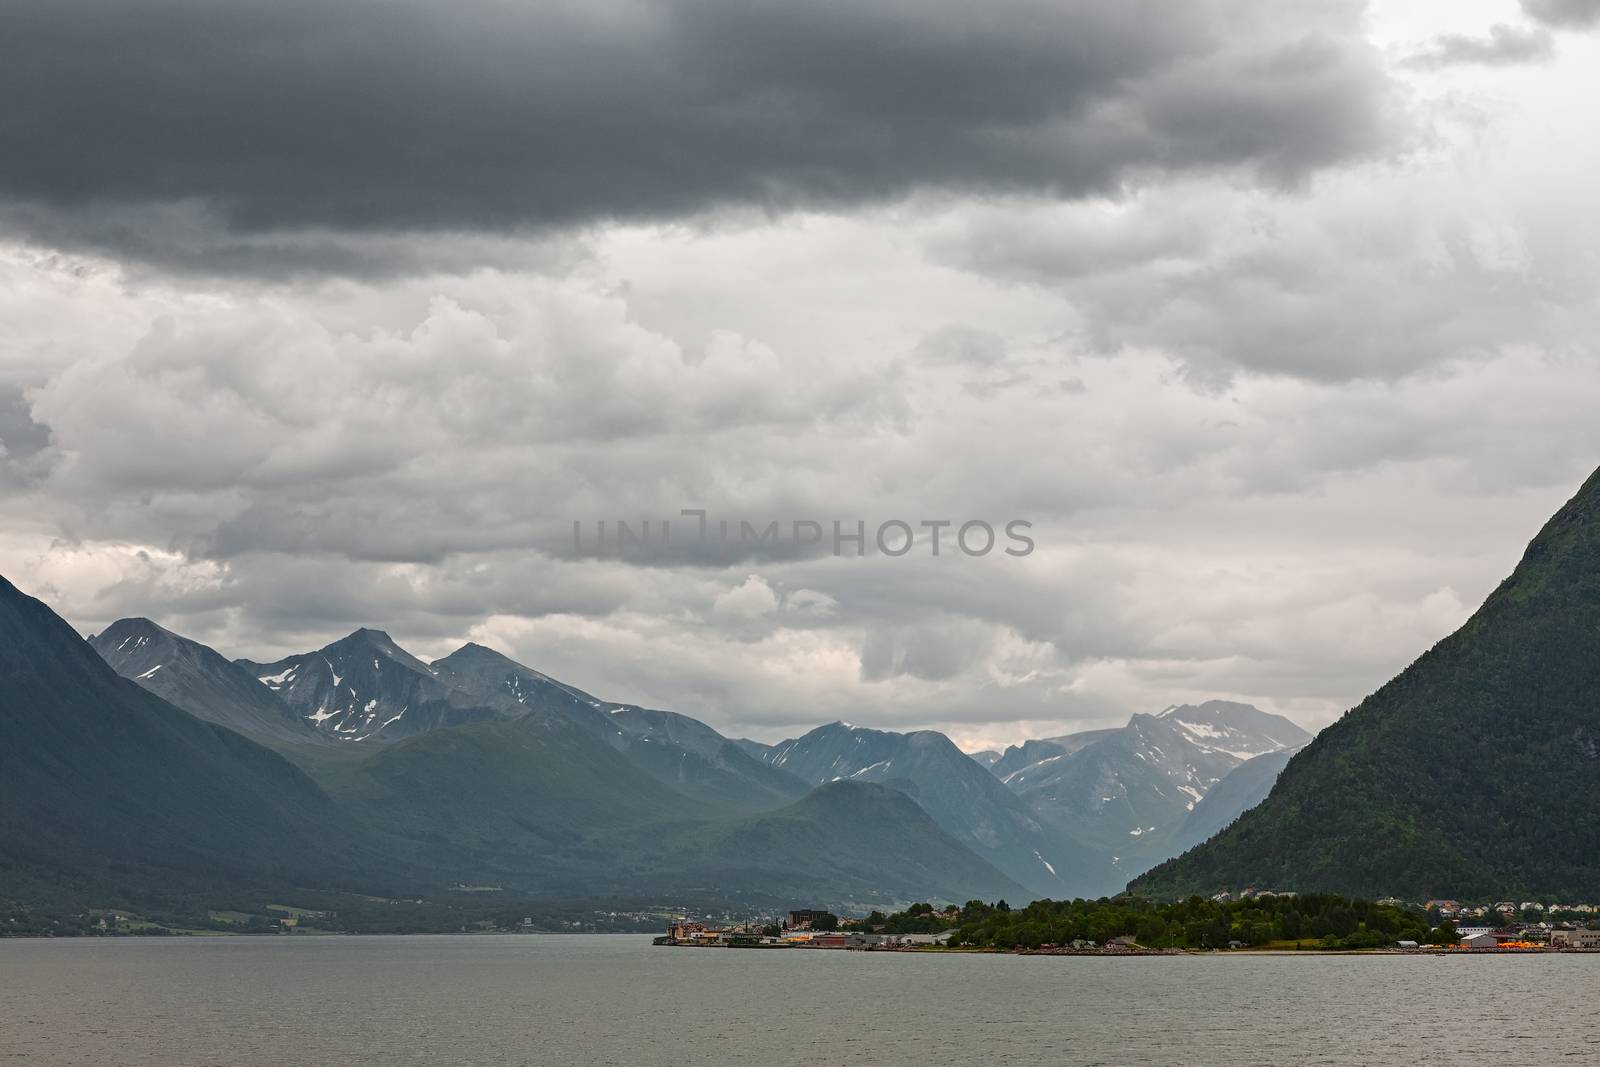 Near Andalsnes along the Romsdalsfjorden under a cloudy sky, Norway